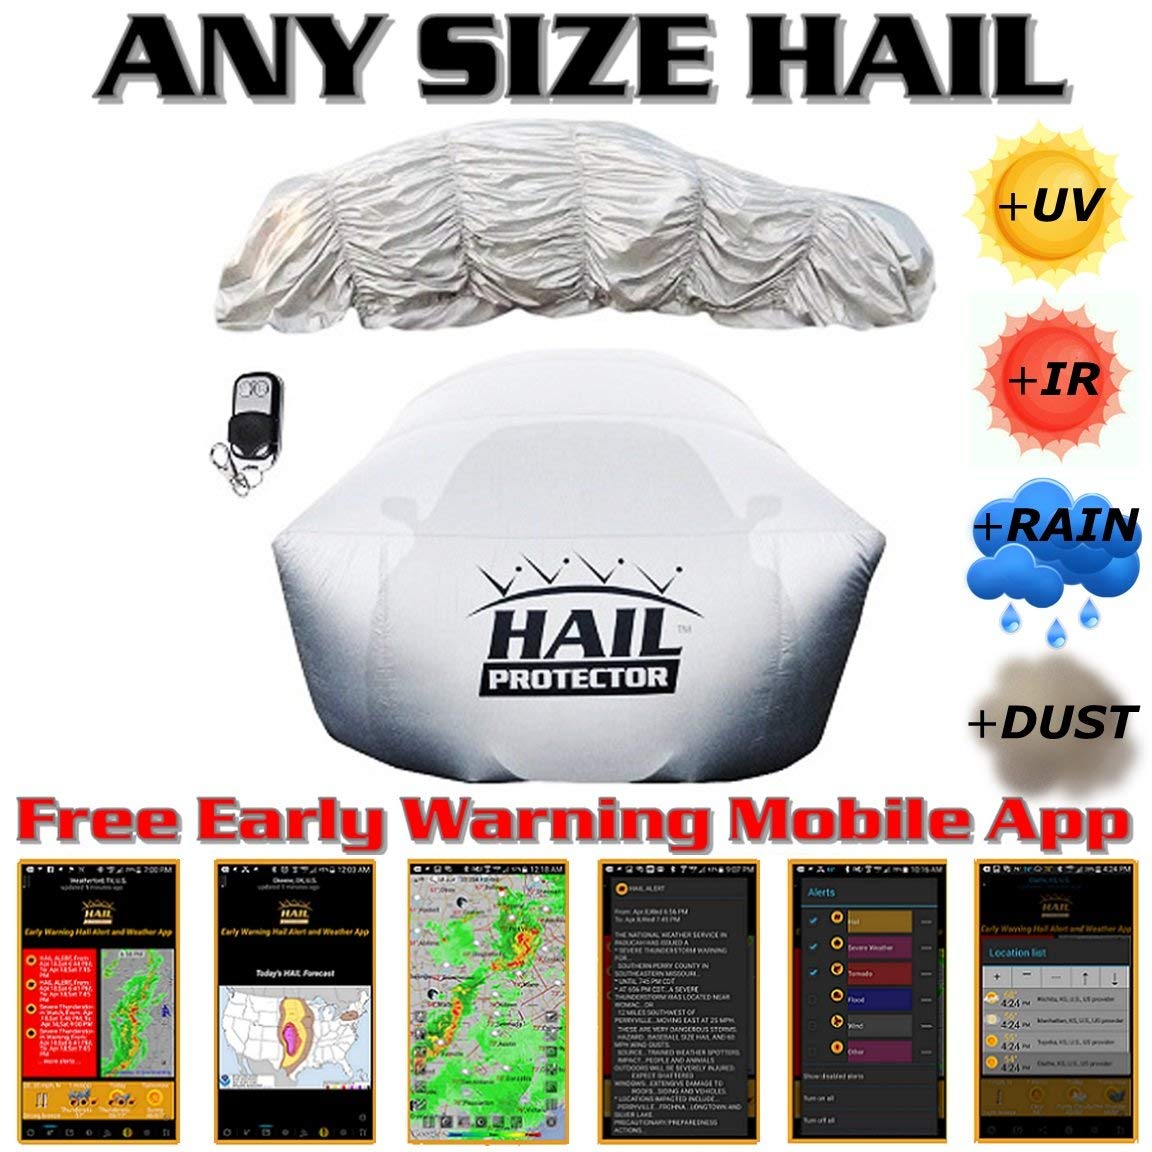 The Best Hail Protection on the Market!